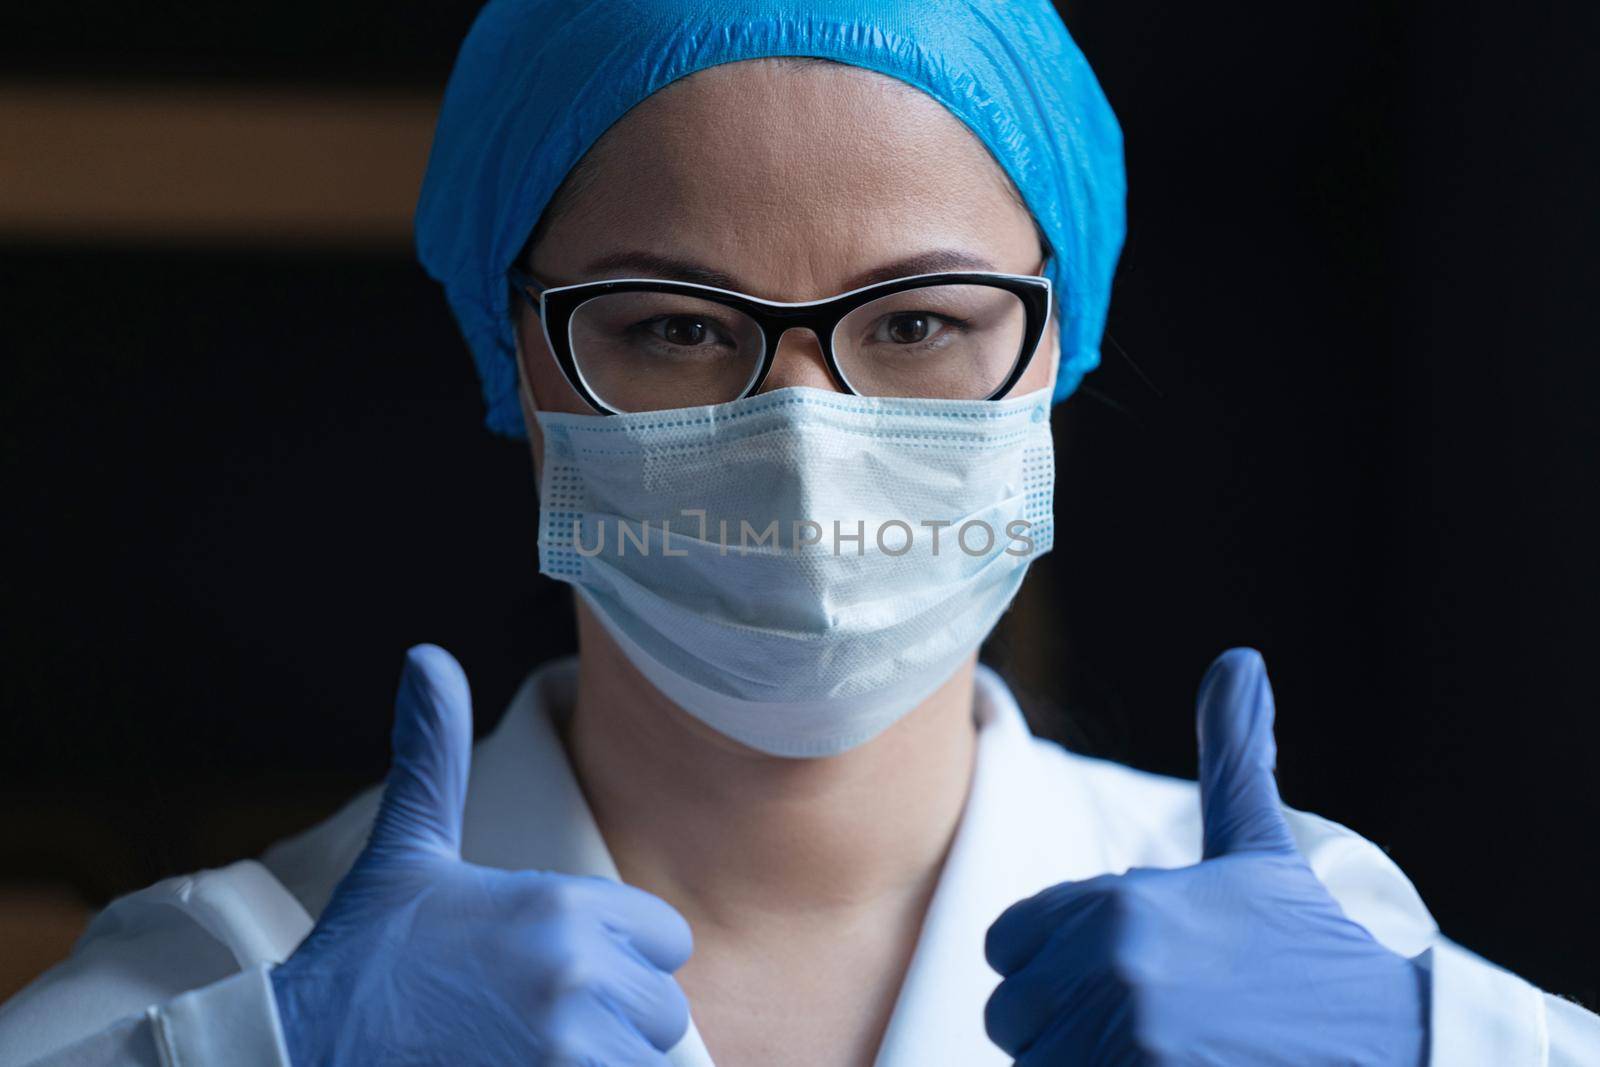 Female Doctor Medical Worker In White Protective Uniform And Surgical Mask Gestures Thumbs Up Showing That Everything Will Be Fine, Medical Laboratory Employee Reports About Good Test Results